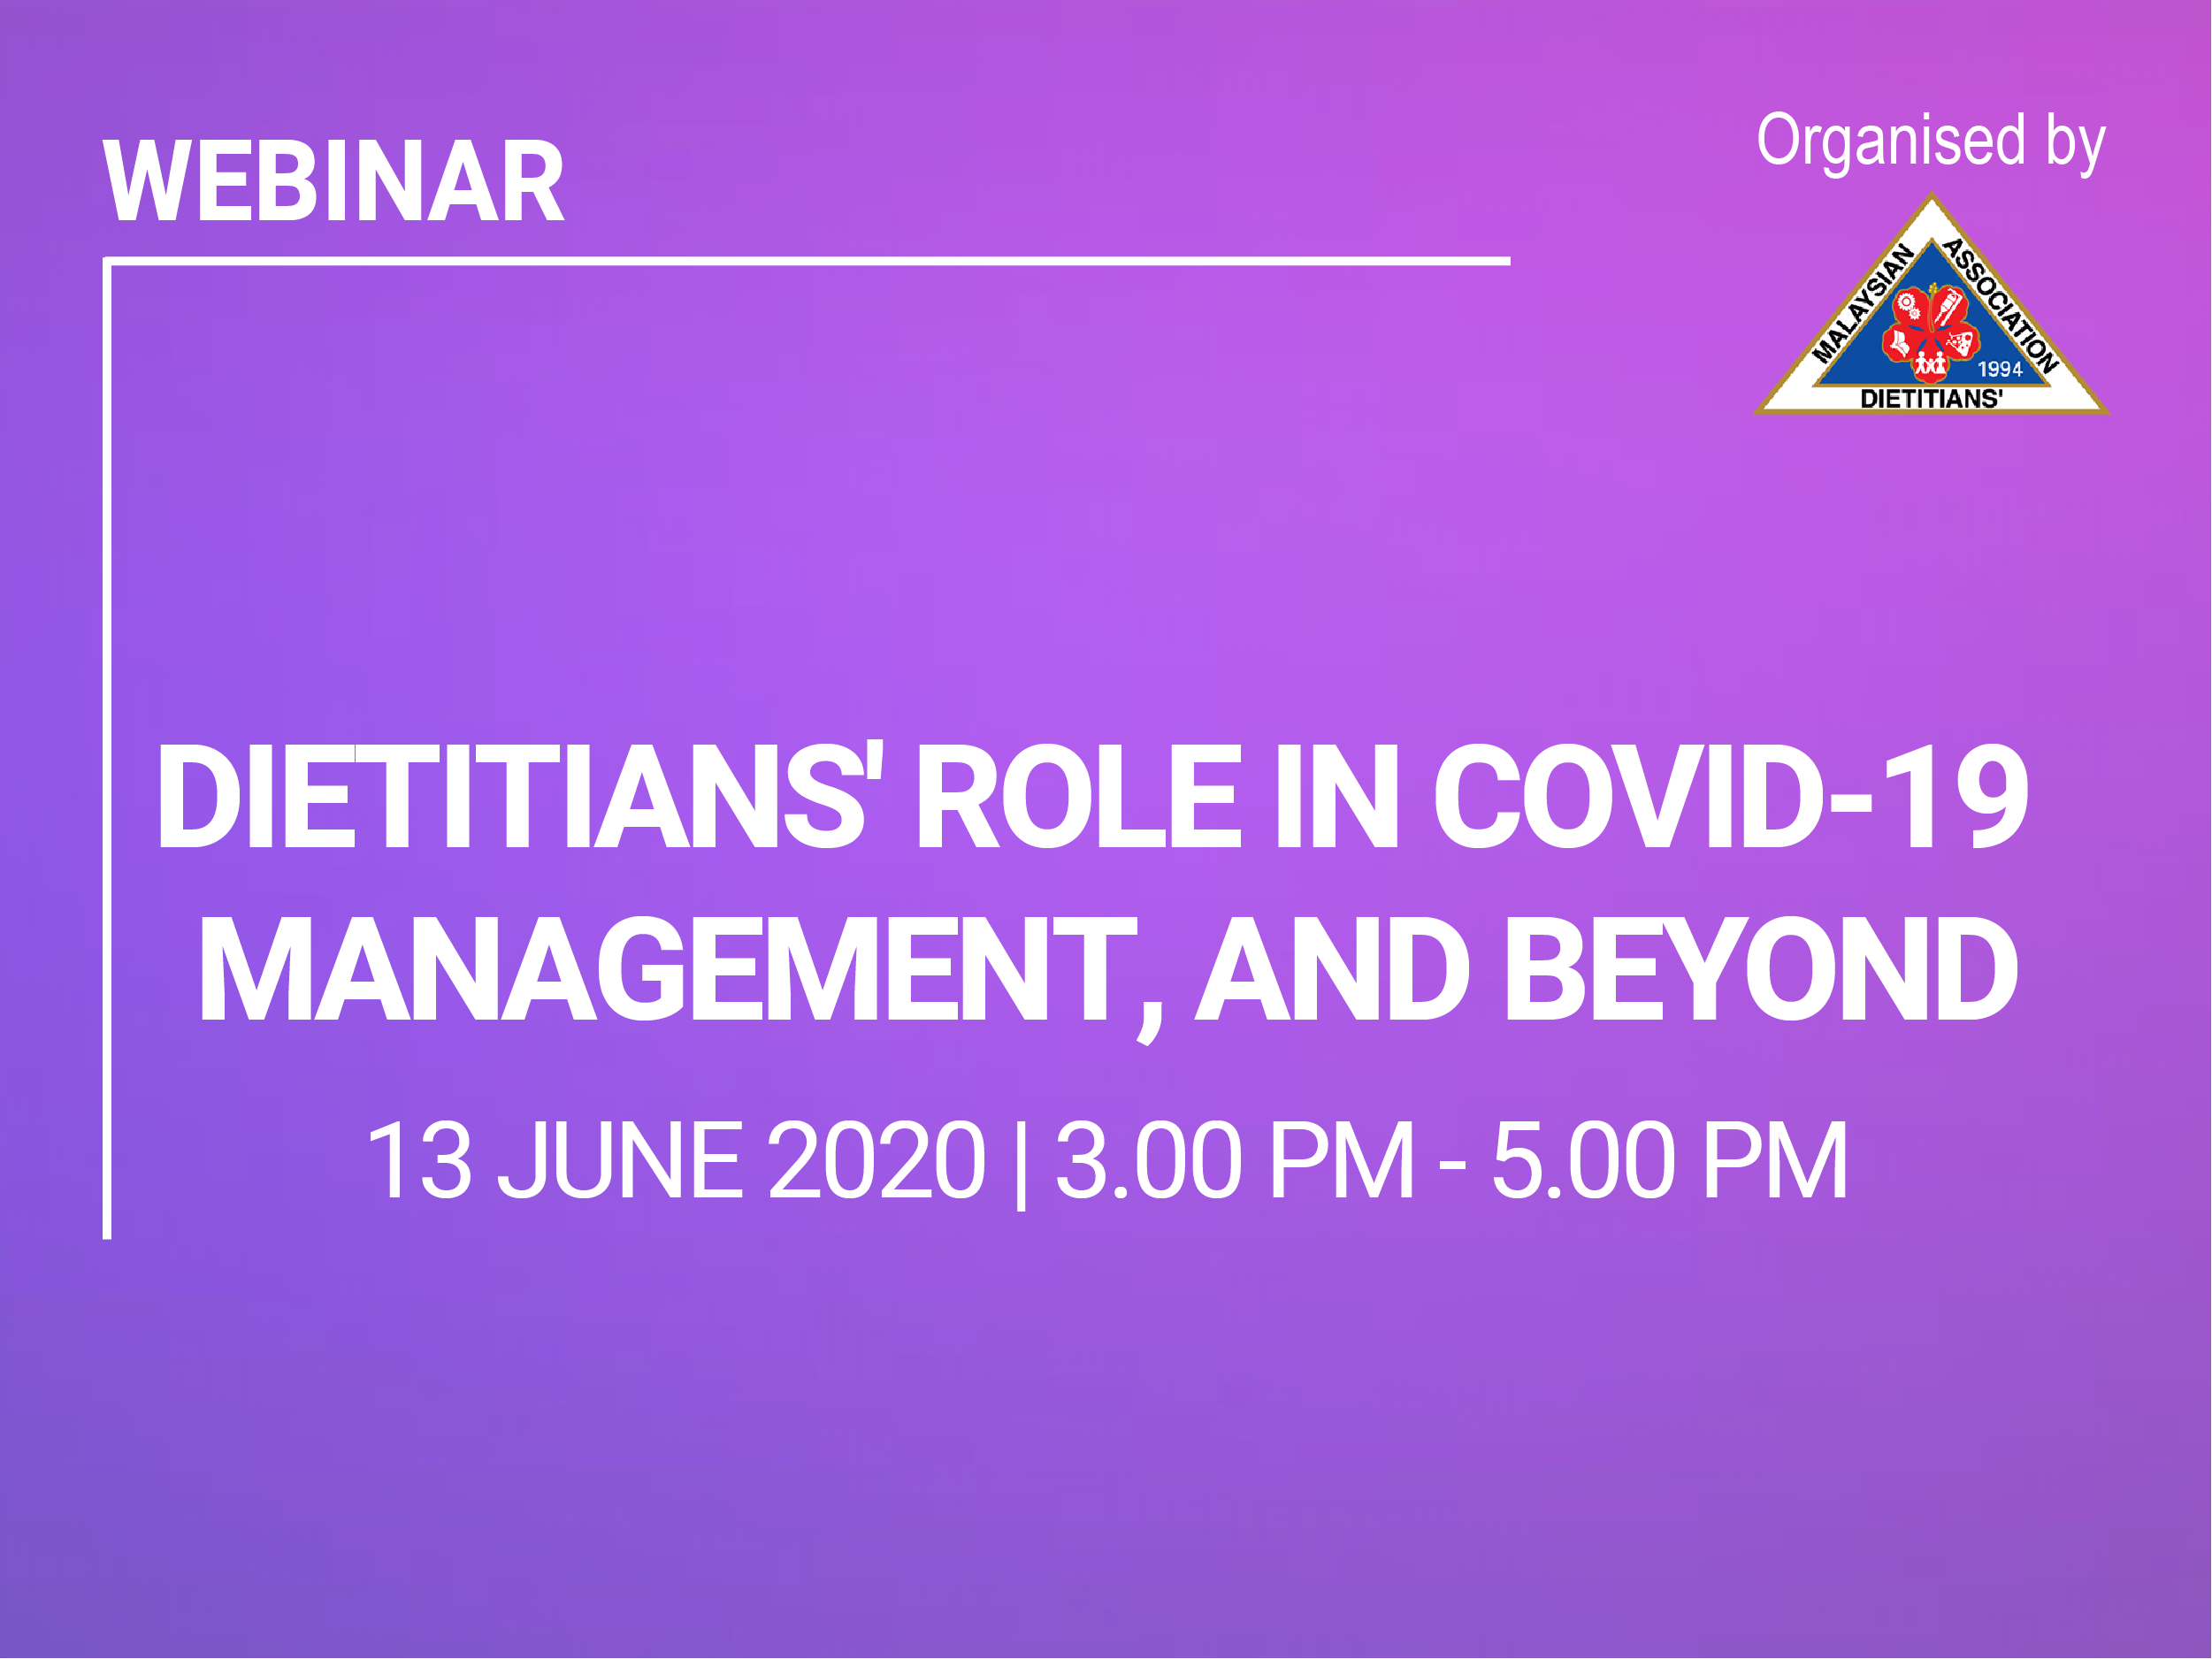 Dietitians' Role in COVID-19 Management, and Beyond